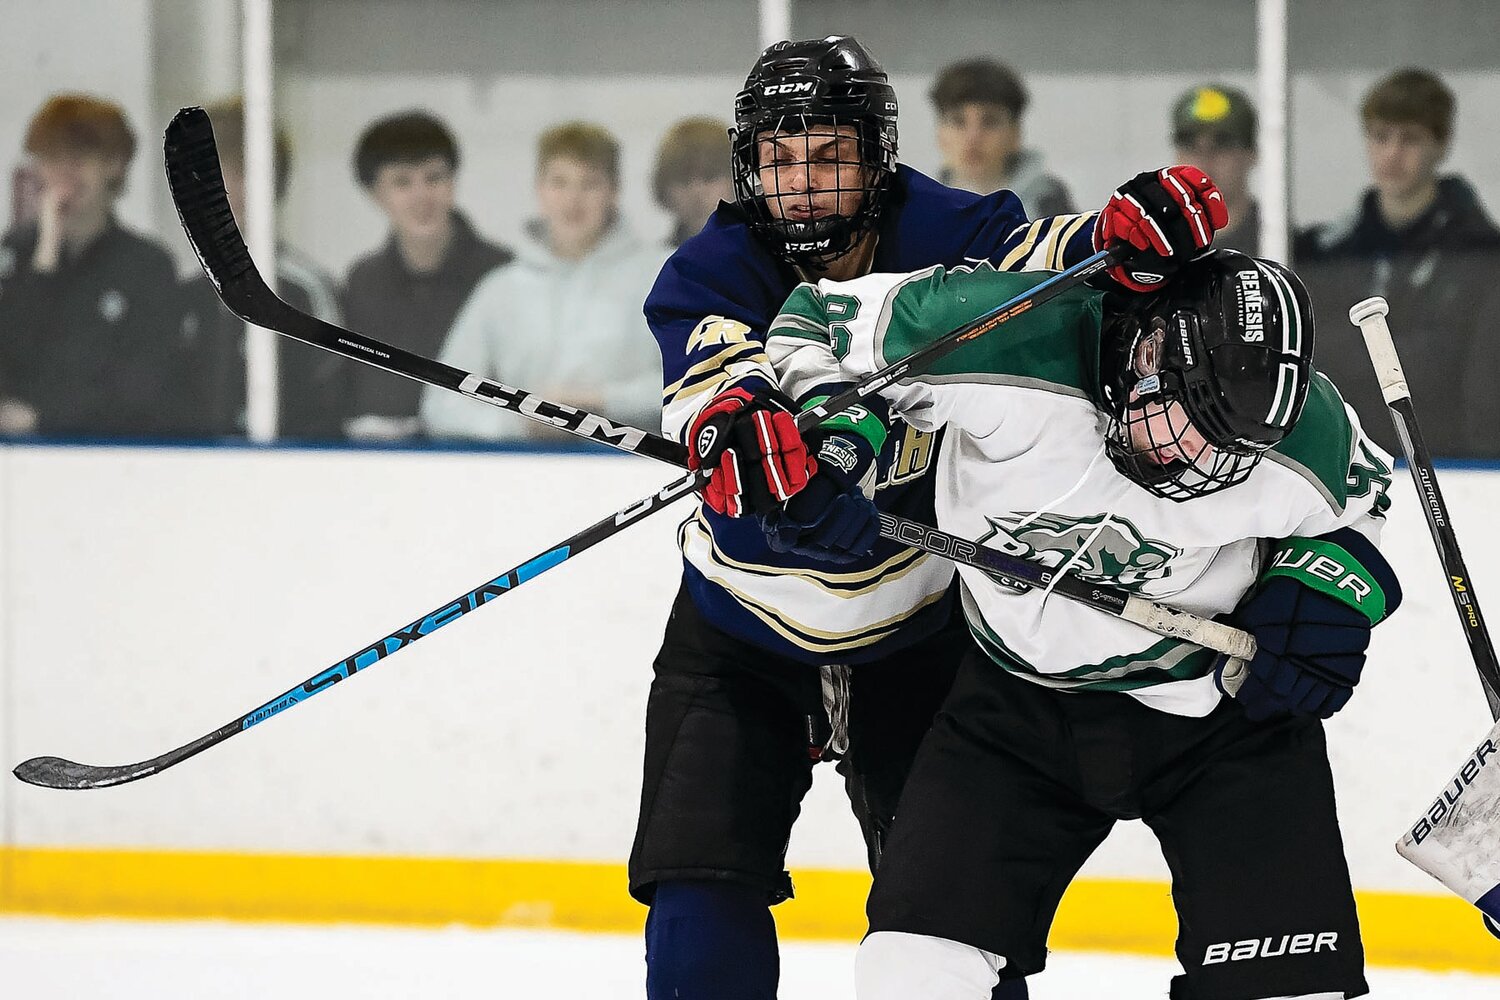 Pennridge’s Nathan McKean gets a cross-check to the back from Council Rock South’s Ilya Kudzinau in the third period.